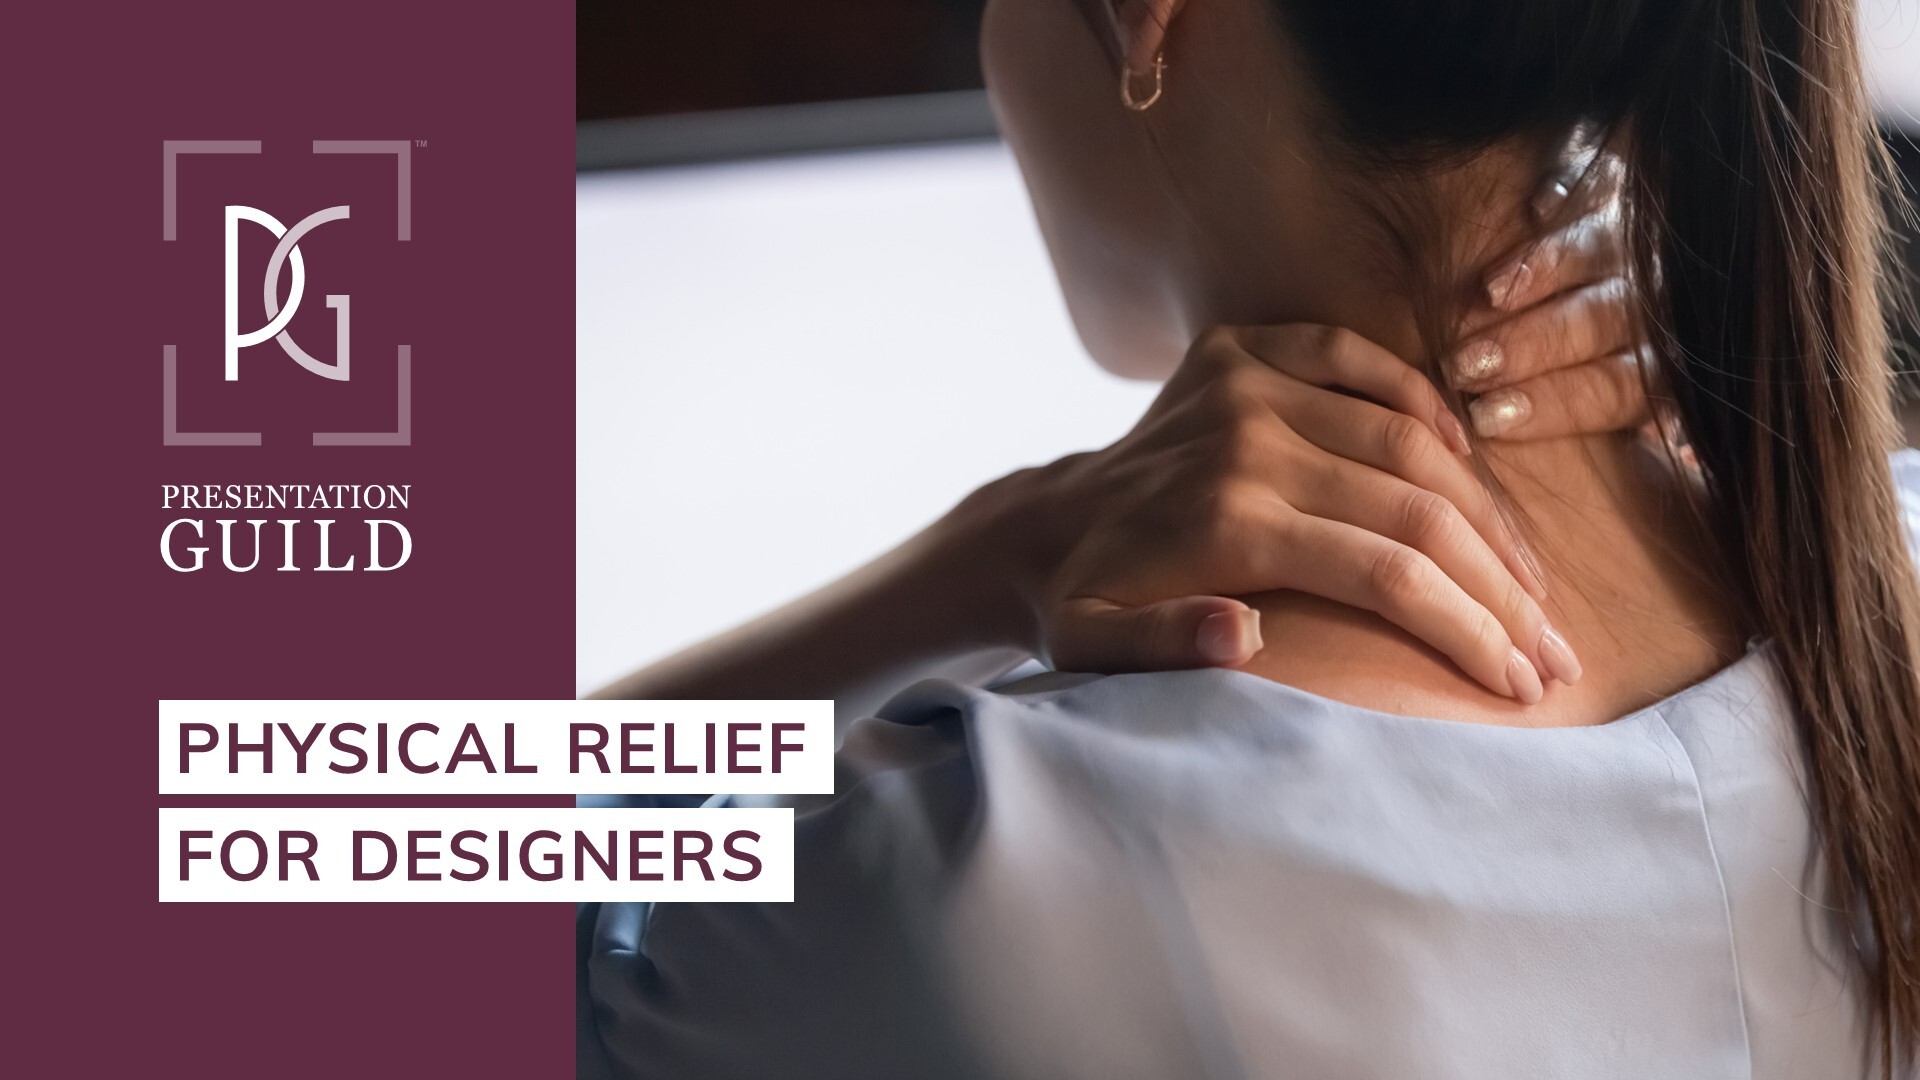 Physical relief for designers